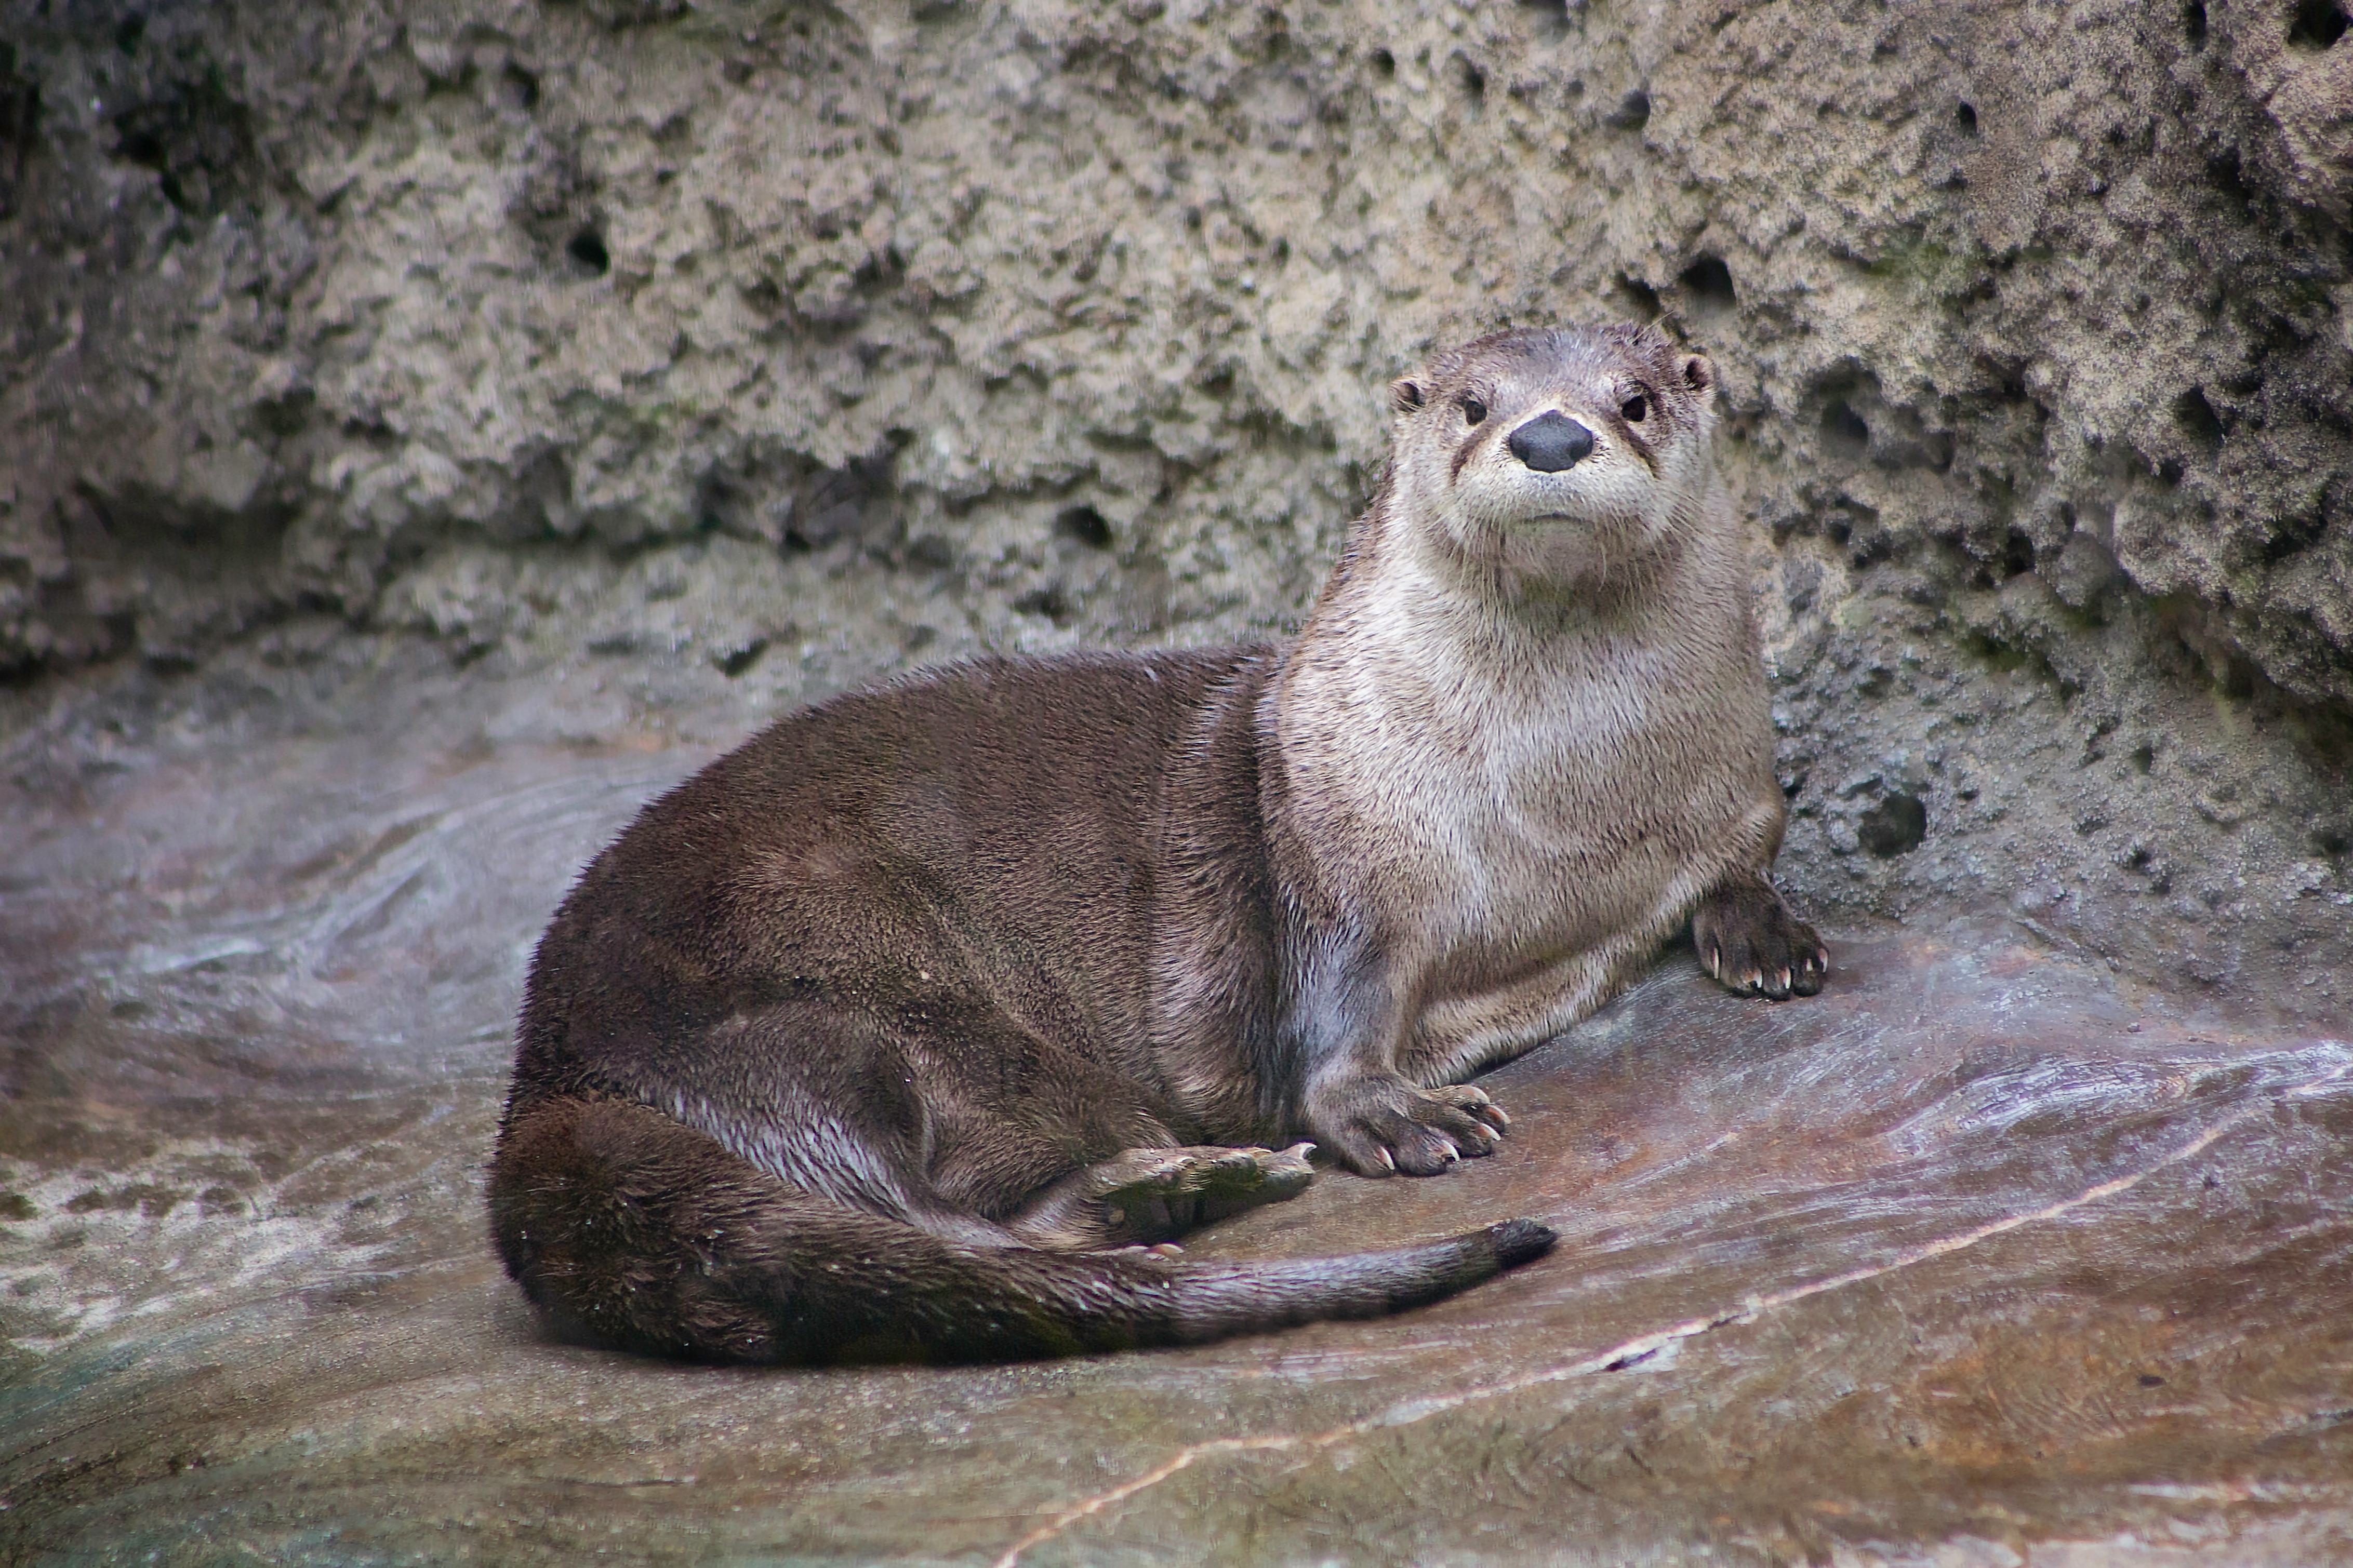 Tippy the Otter lays on a rock